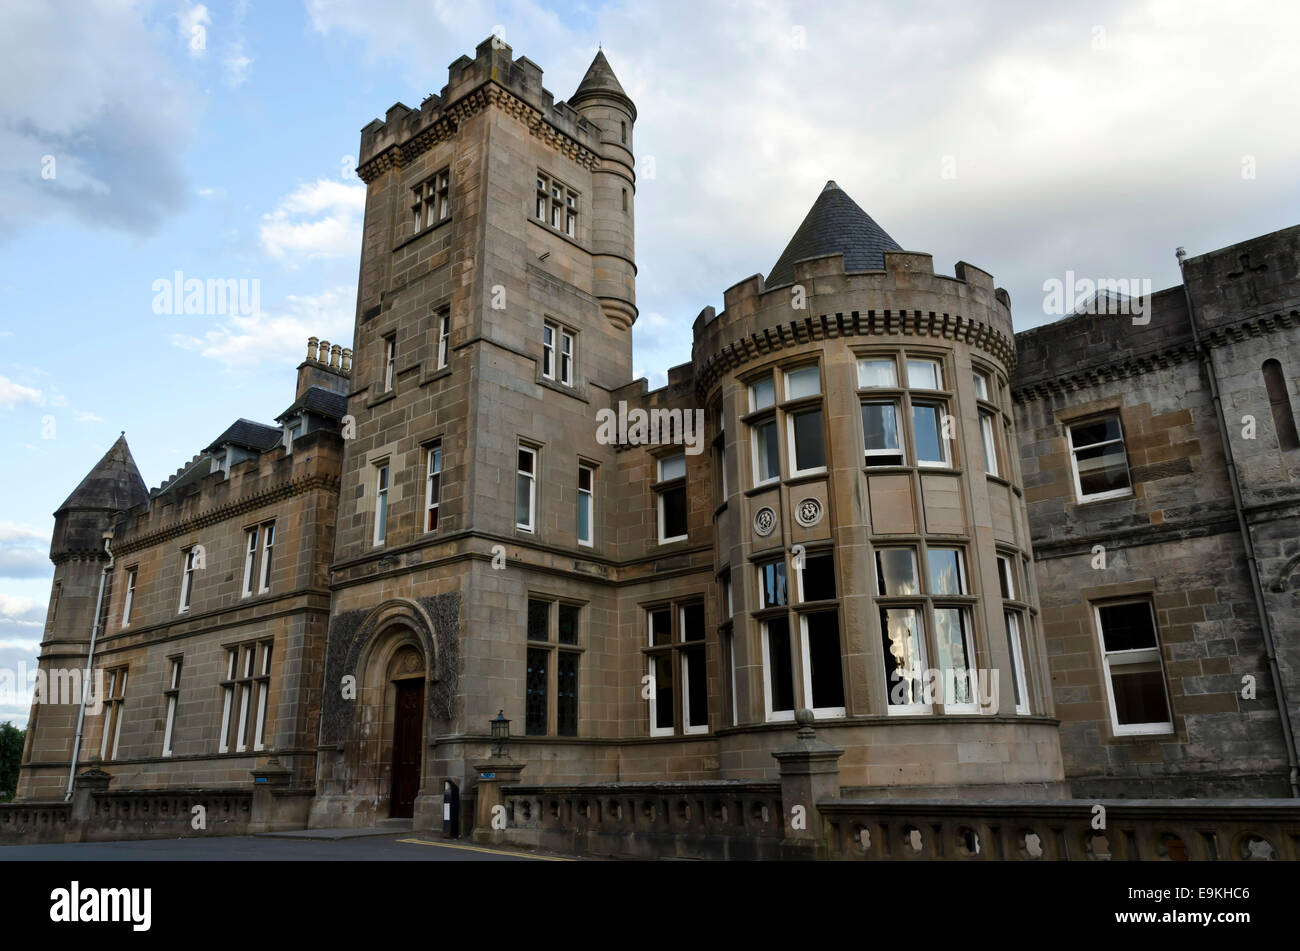 Airthrey Castle, once a maternity hospital, now part of Stirling University, near Stirling, Central Scotland. Stock Photo